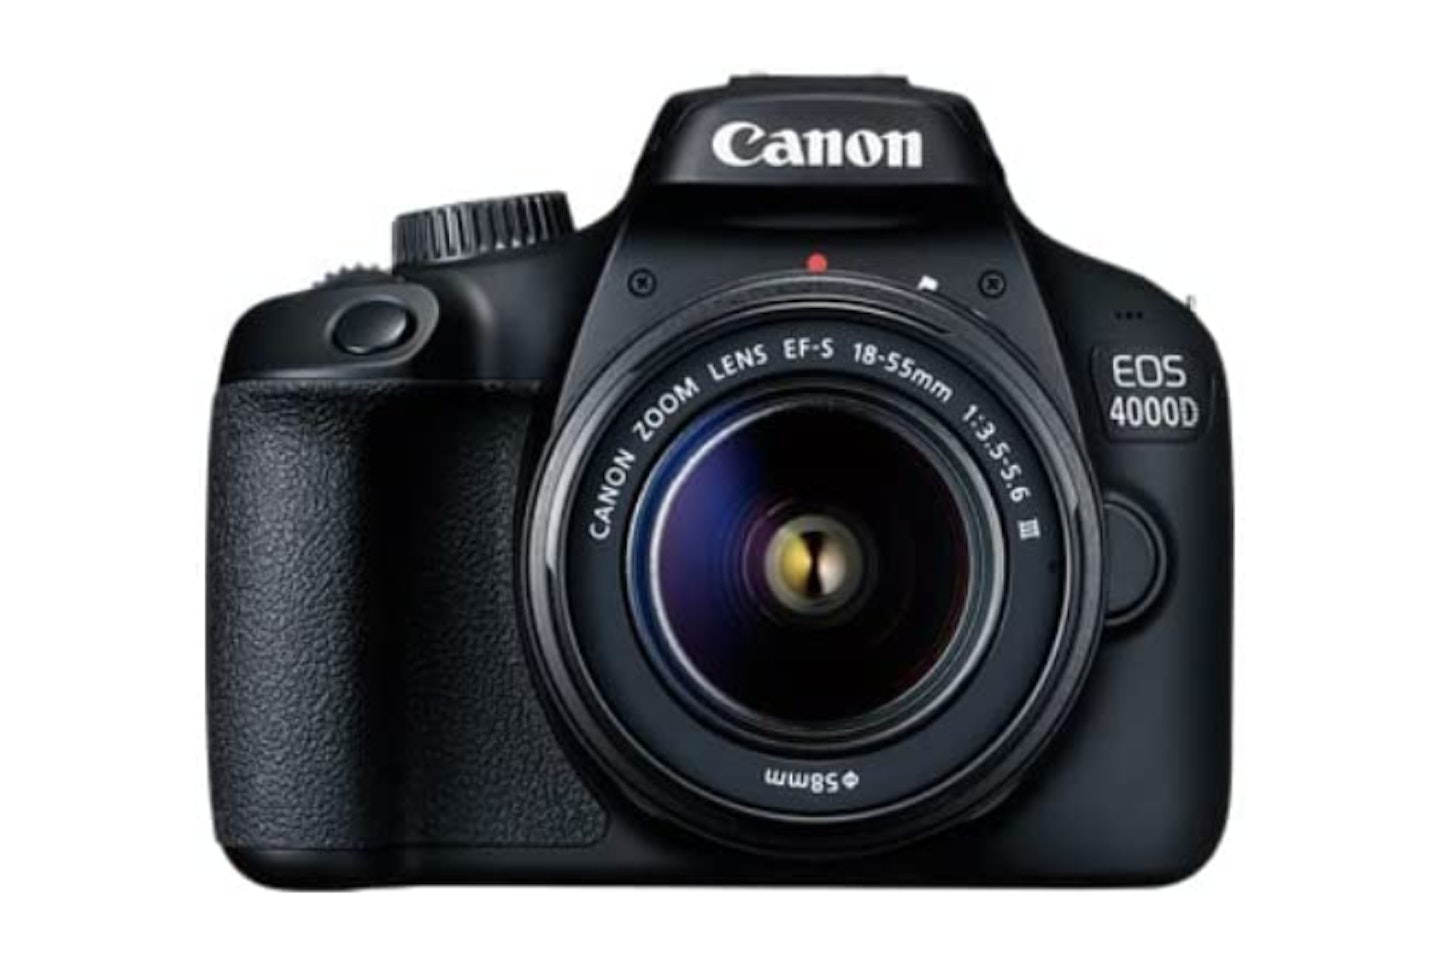 Canon EOS 4000D - one of the best entry-level cameras